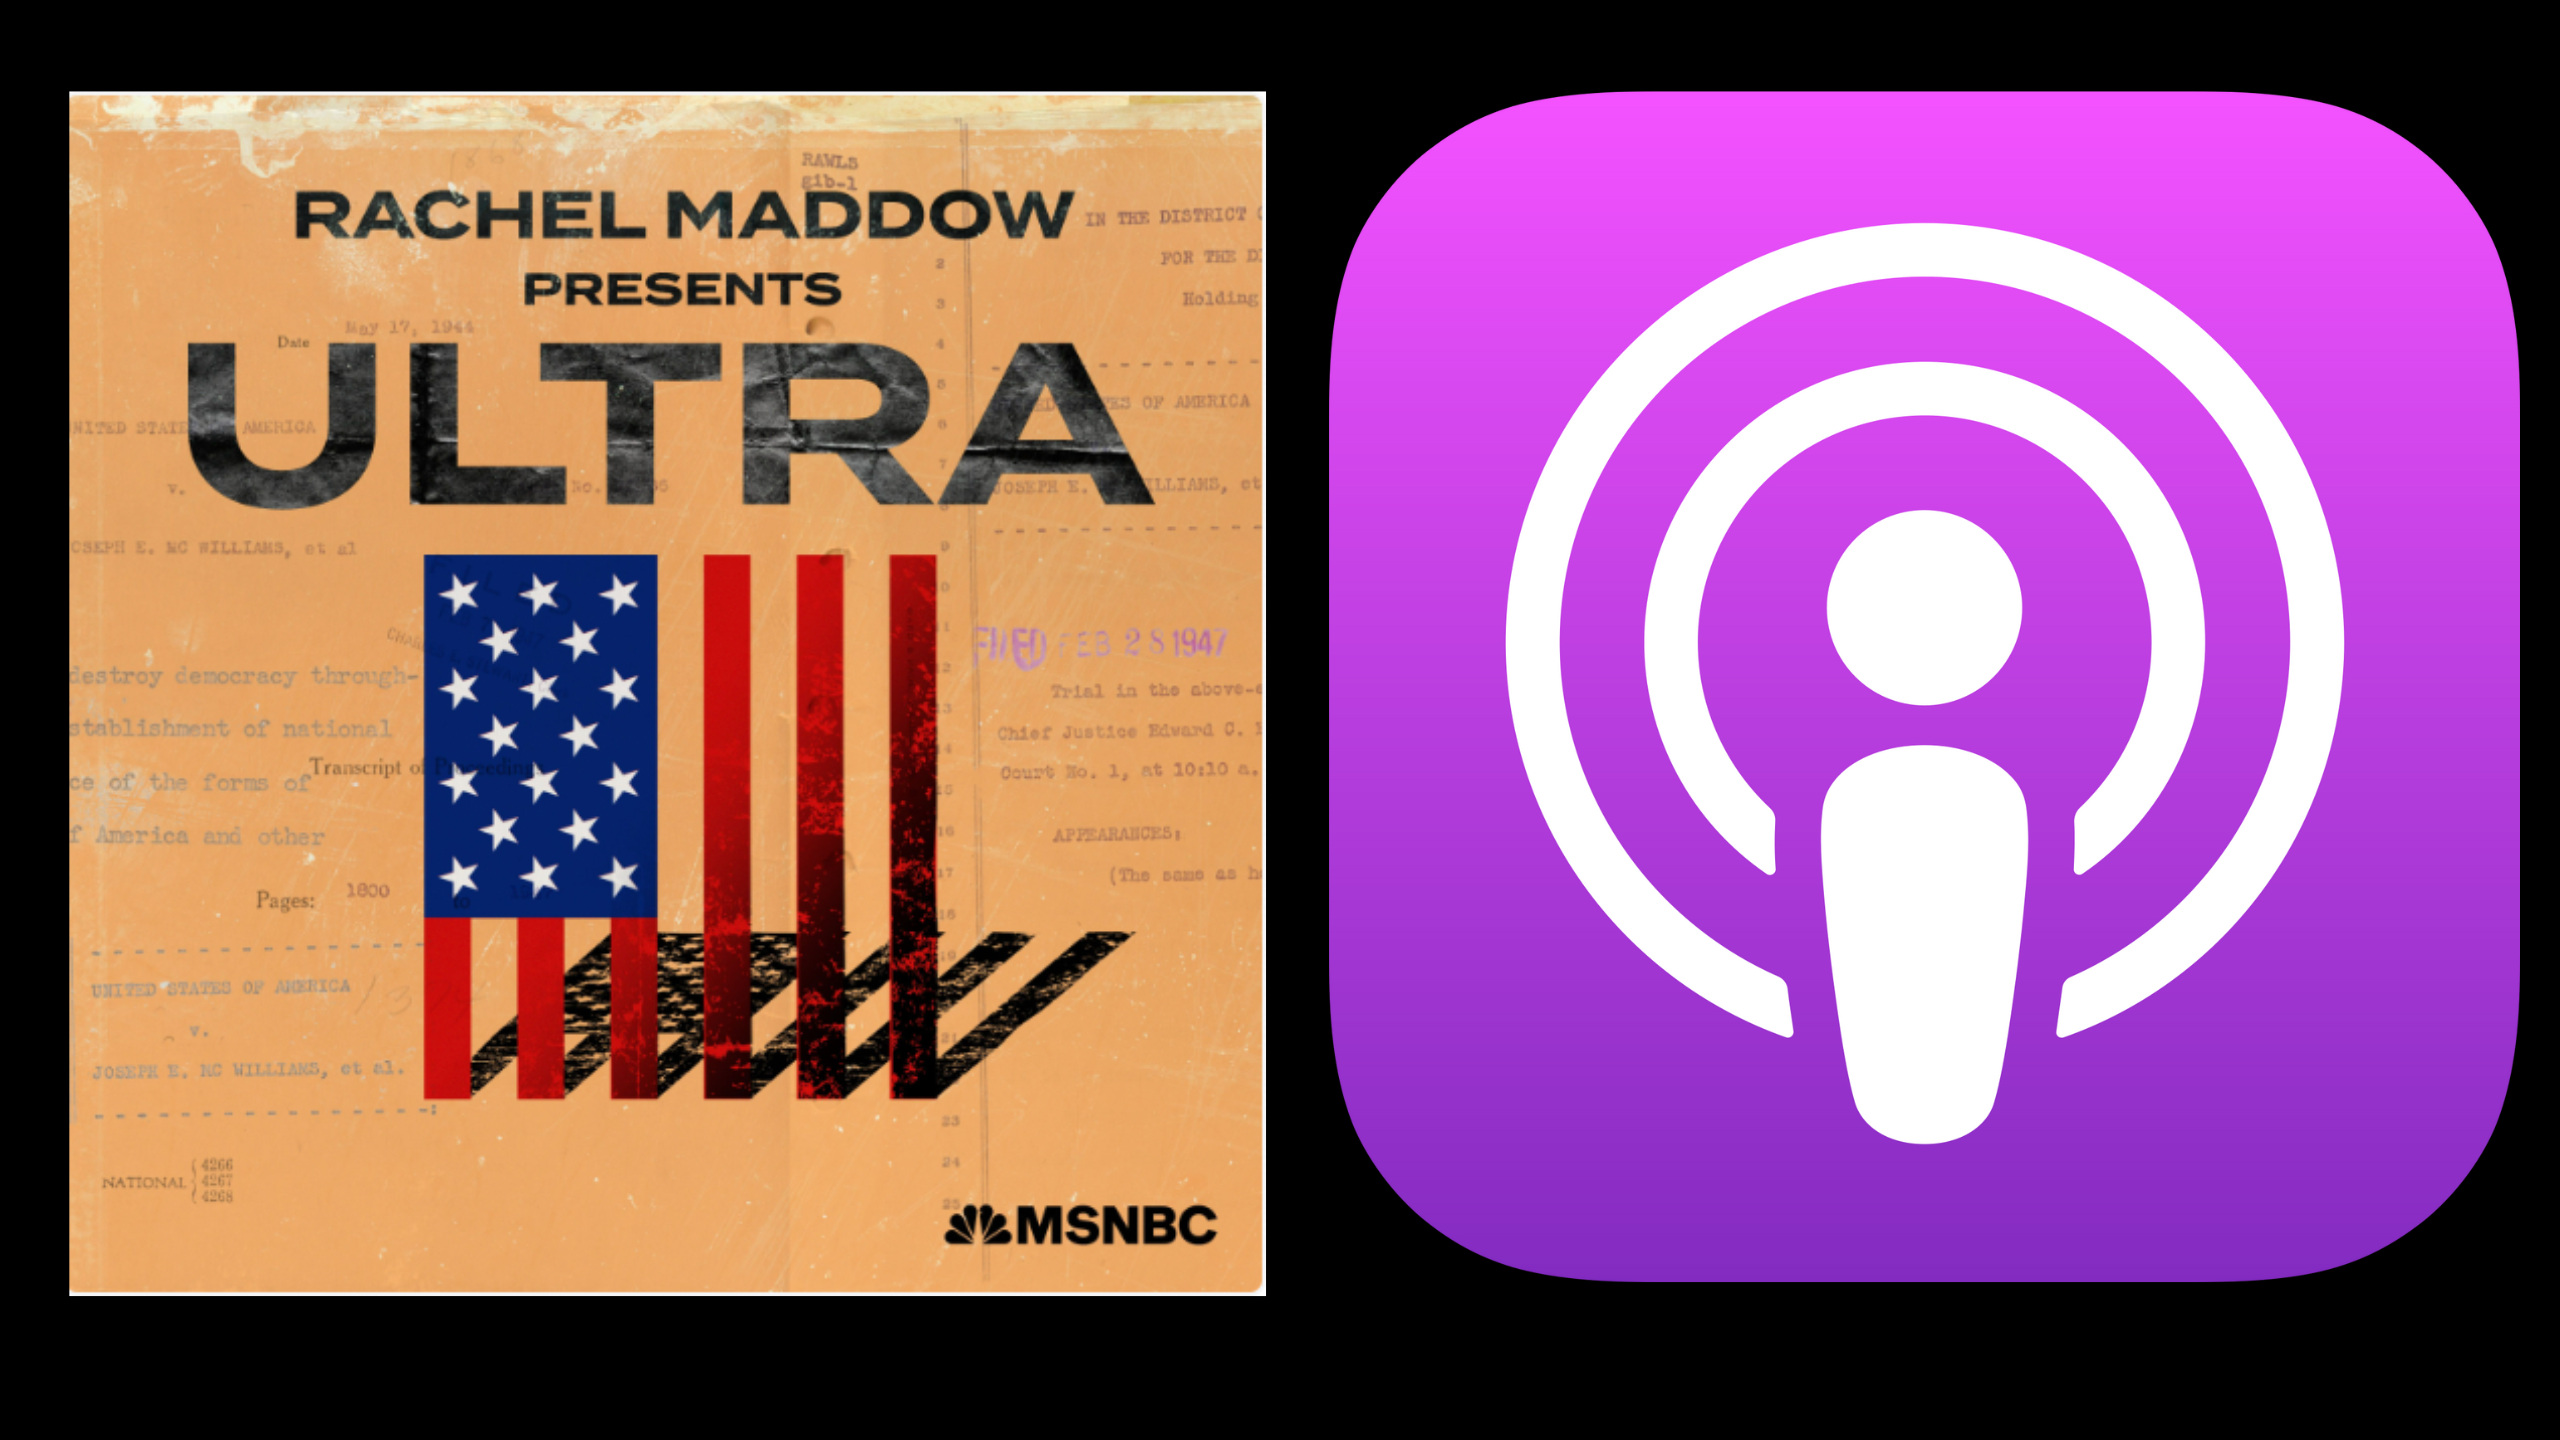 Top 50 Podcasts in America This Week: Rachel Maddow’s ‘Ultra’ Climbs to #1